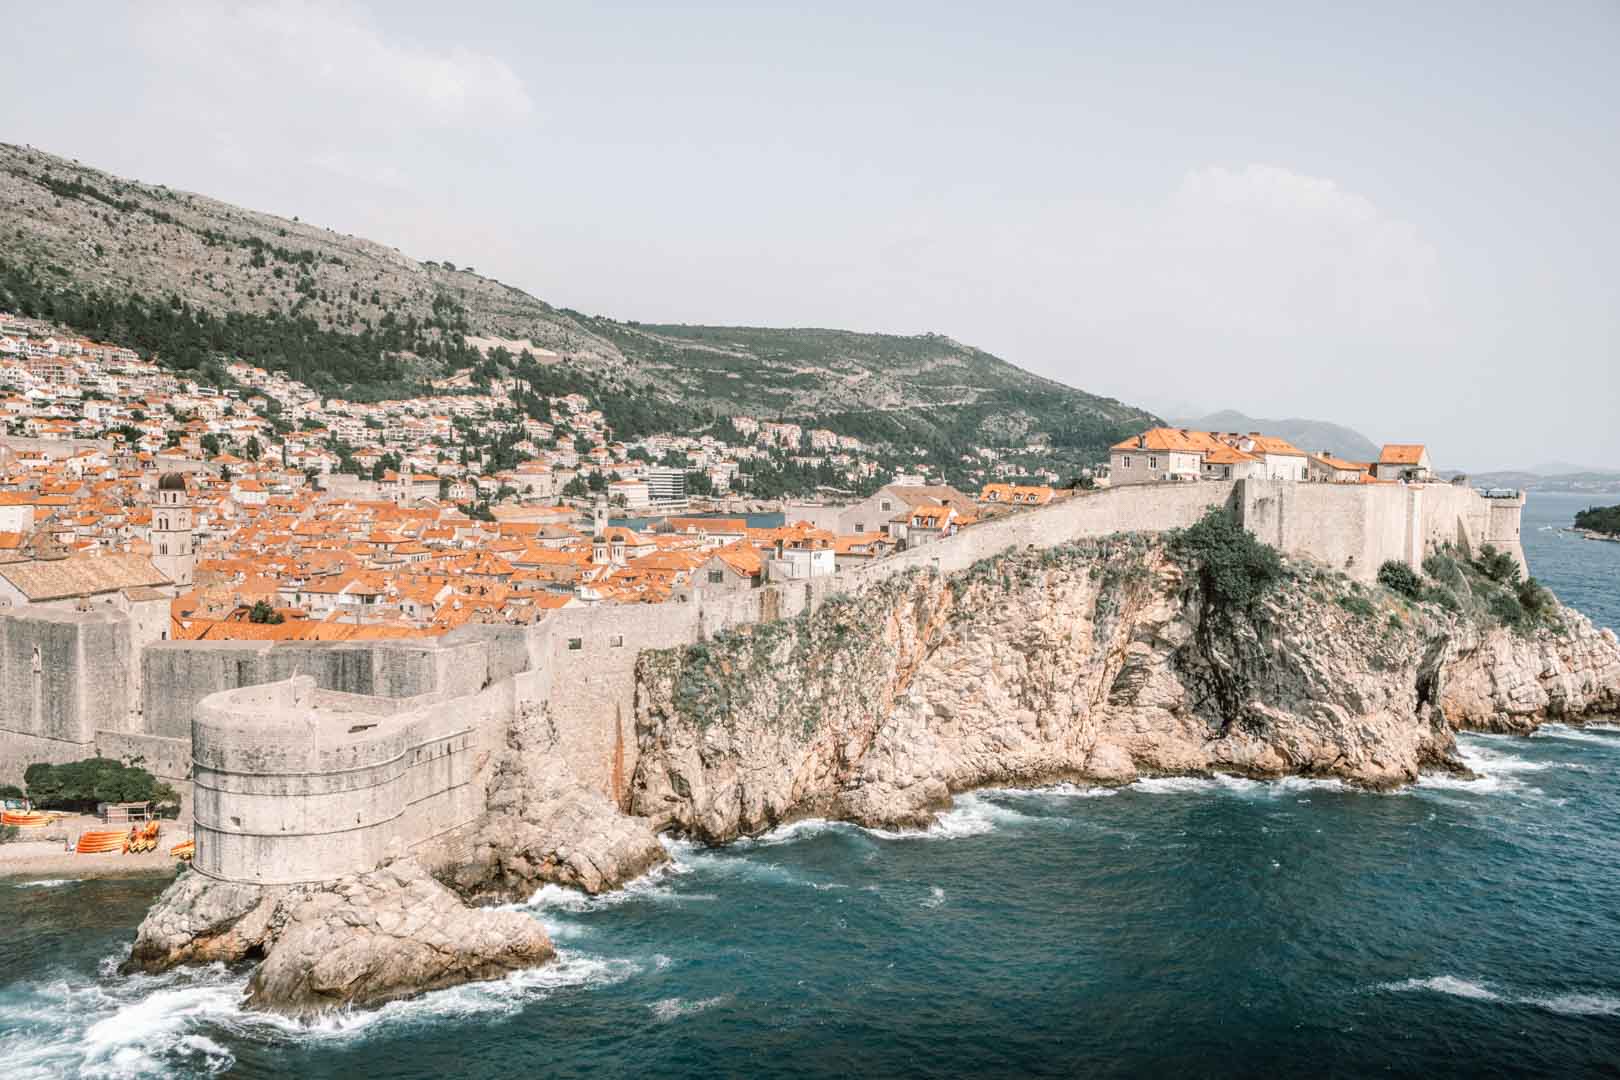 Dubrovnik city walls viewpoint